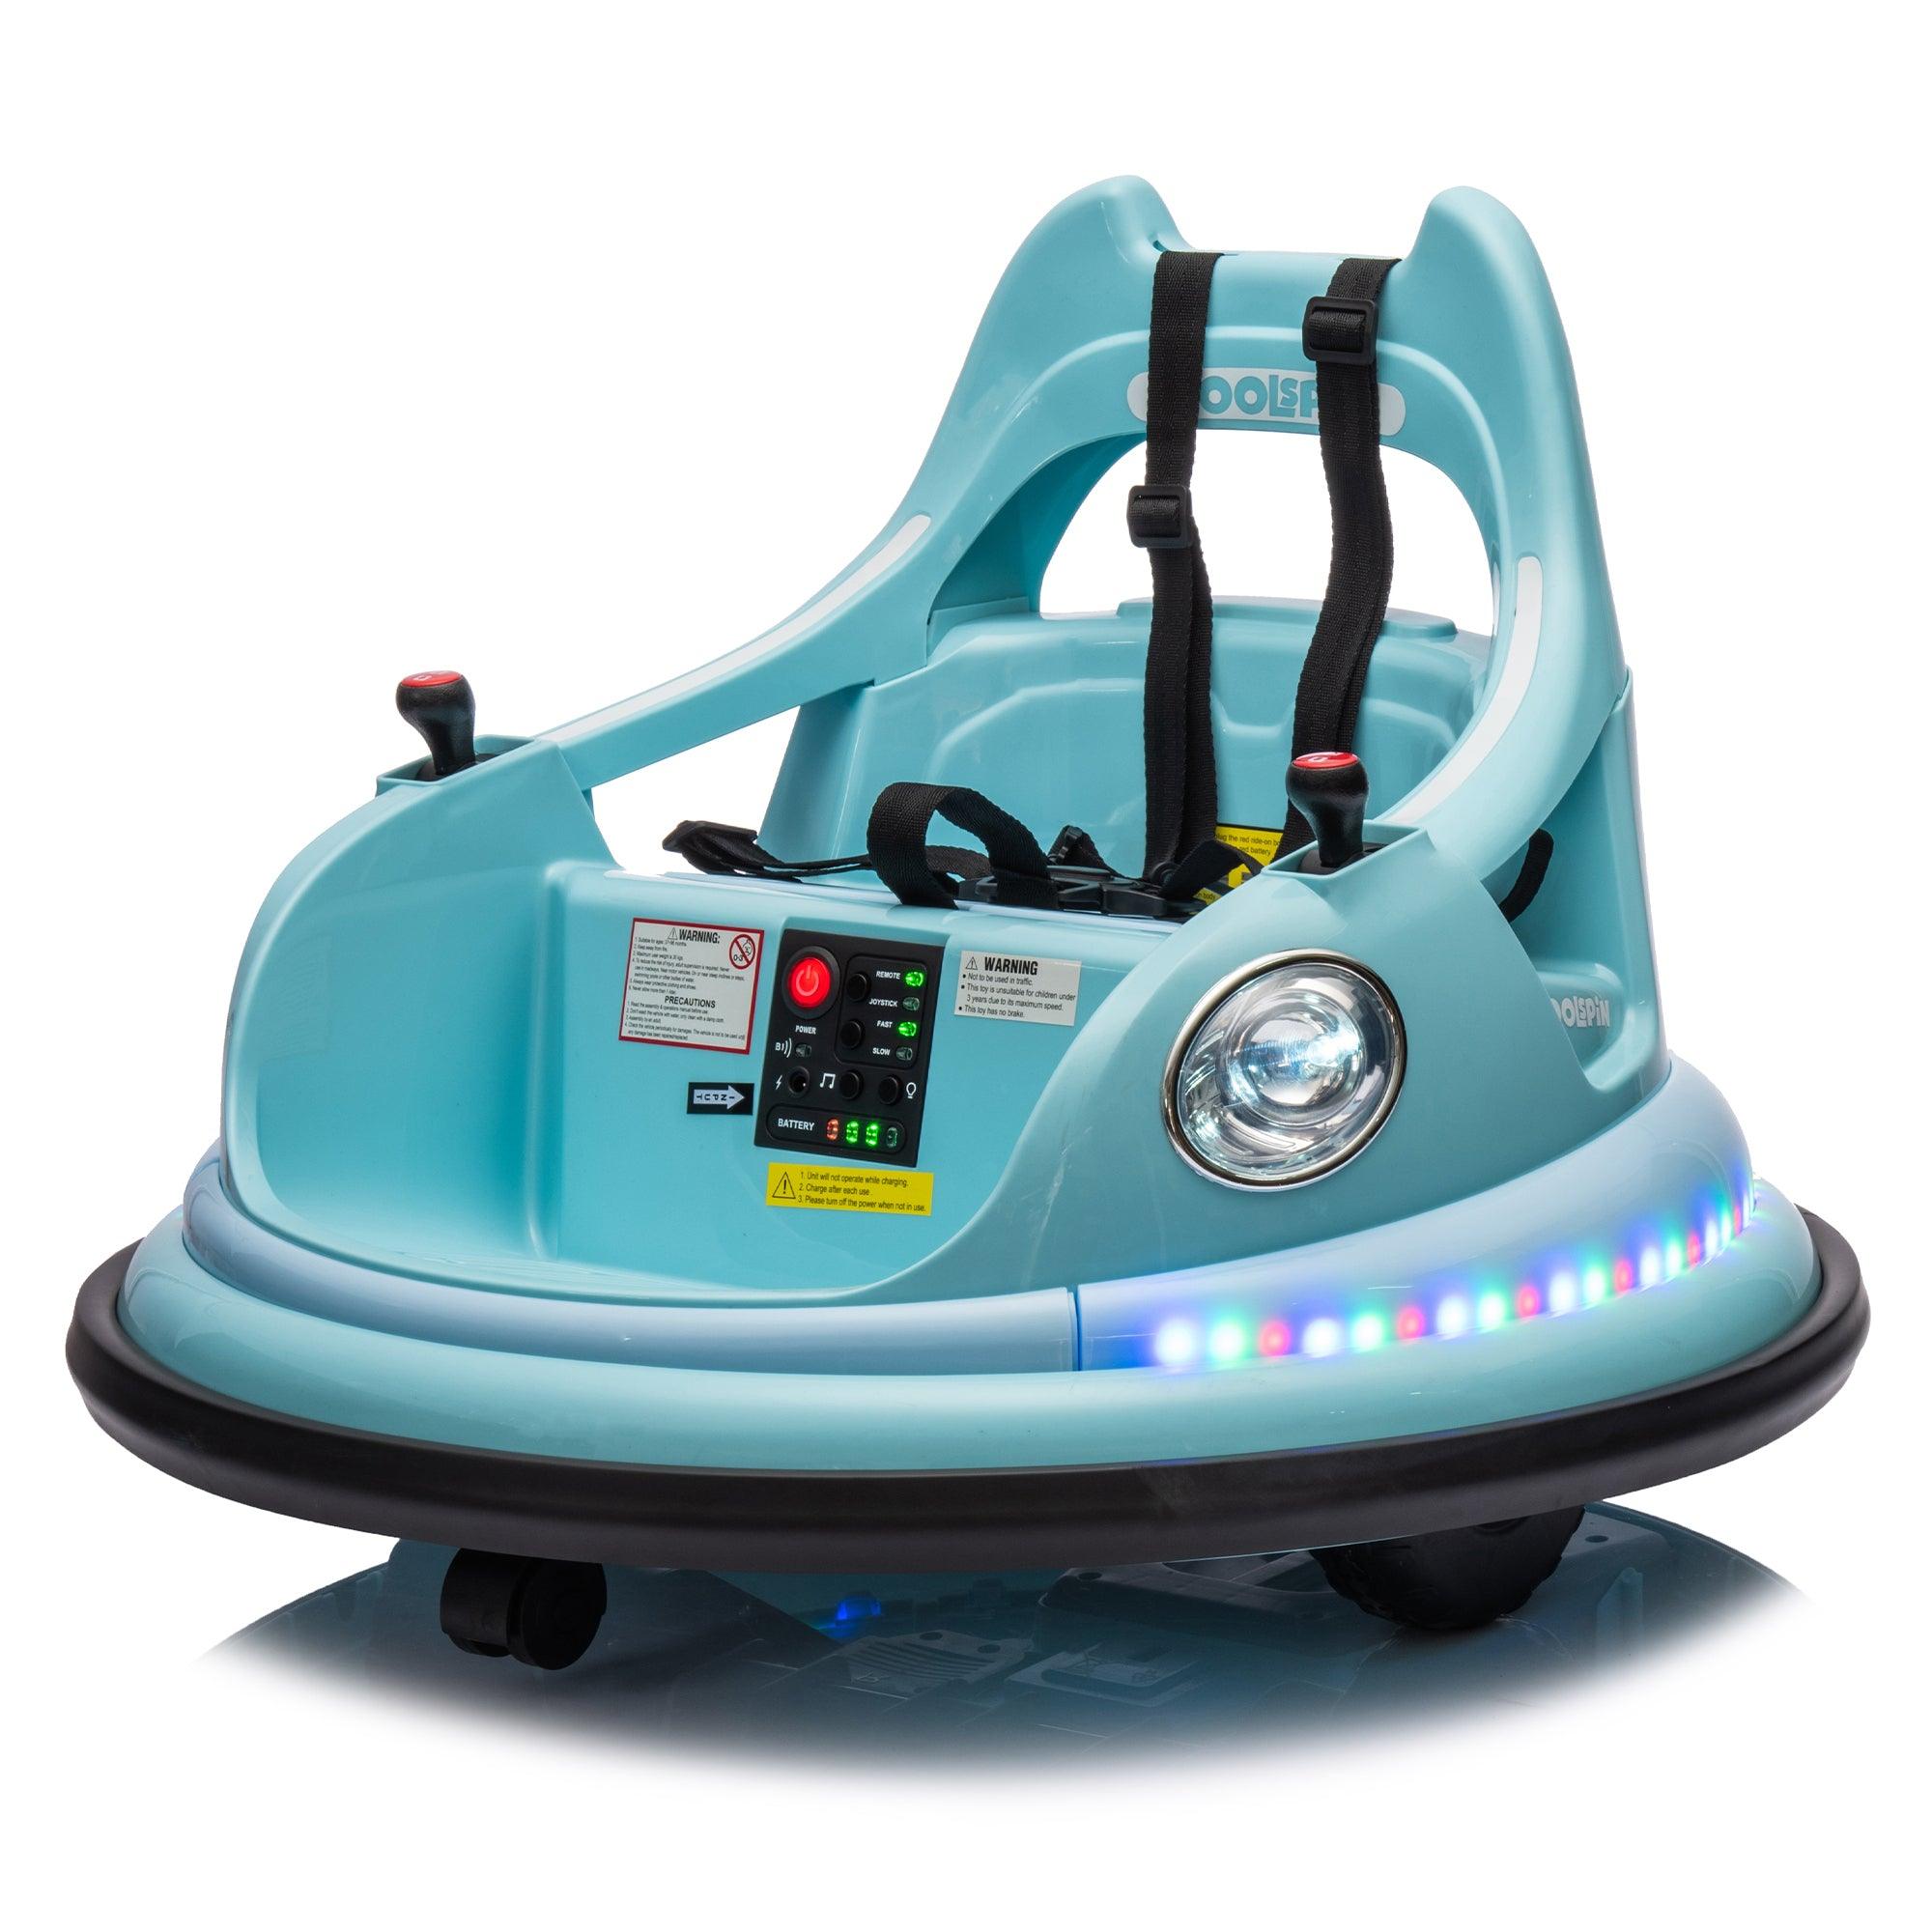 🆓🚛 12V Ride On Bumper Car for Kids, Electric Car for Kids, 1.5-5 Years Old, W/Remote Control, Led Lights, Bluetooth & 360 Degree Spin, Vehicle Body With Anti-Collision Padding Five-Point Safety Belt, Blue